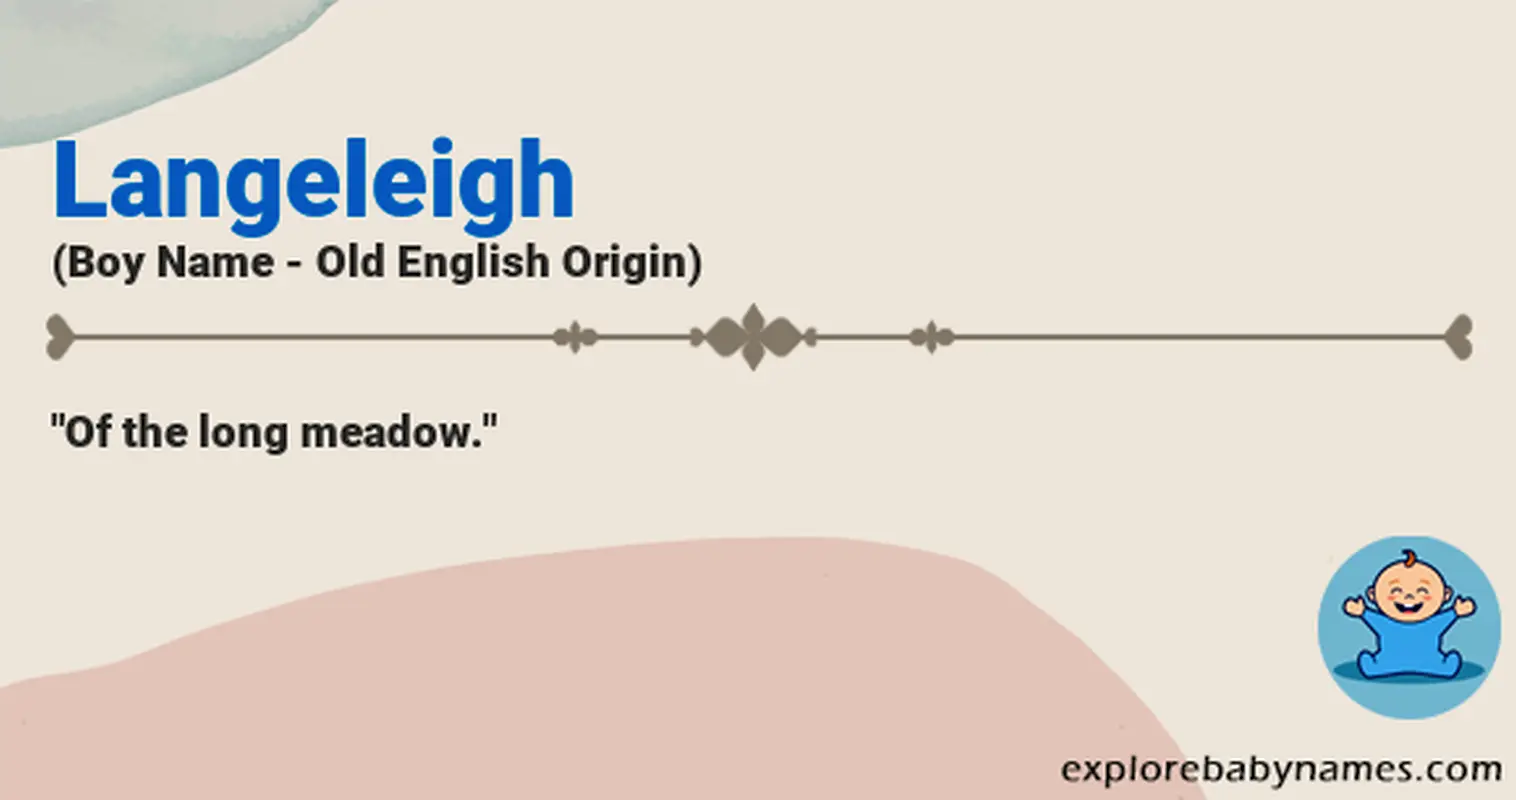 Meaning of Langeleigh